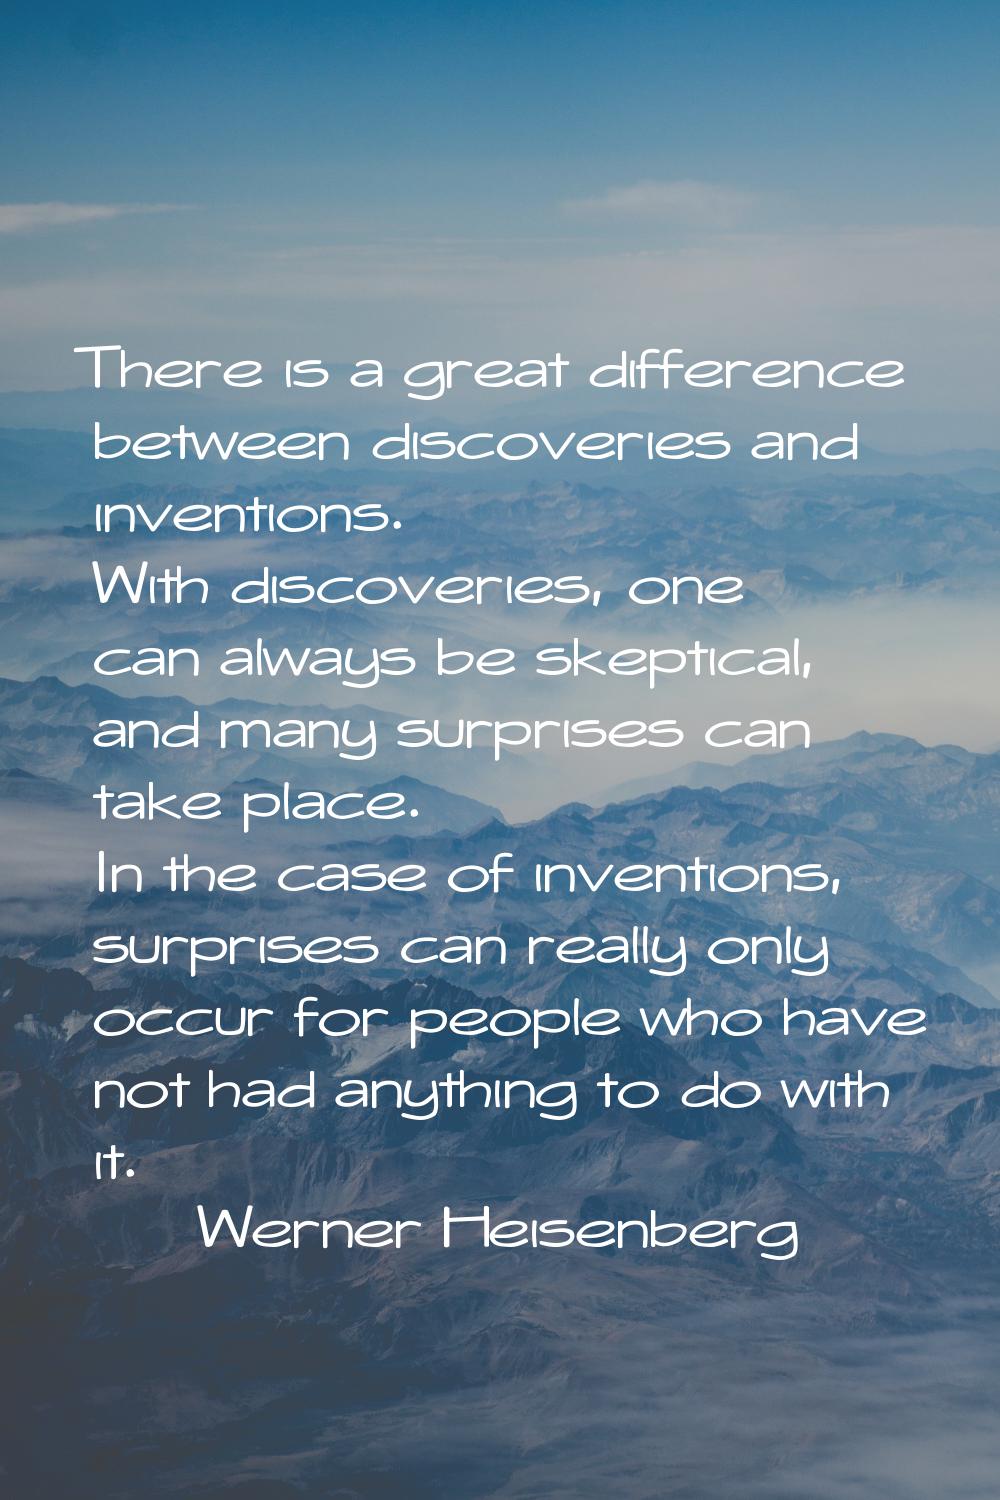 There is a great difference between discoveries and inventions. With discoveries, one can always be